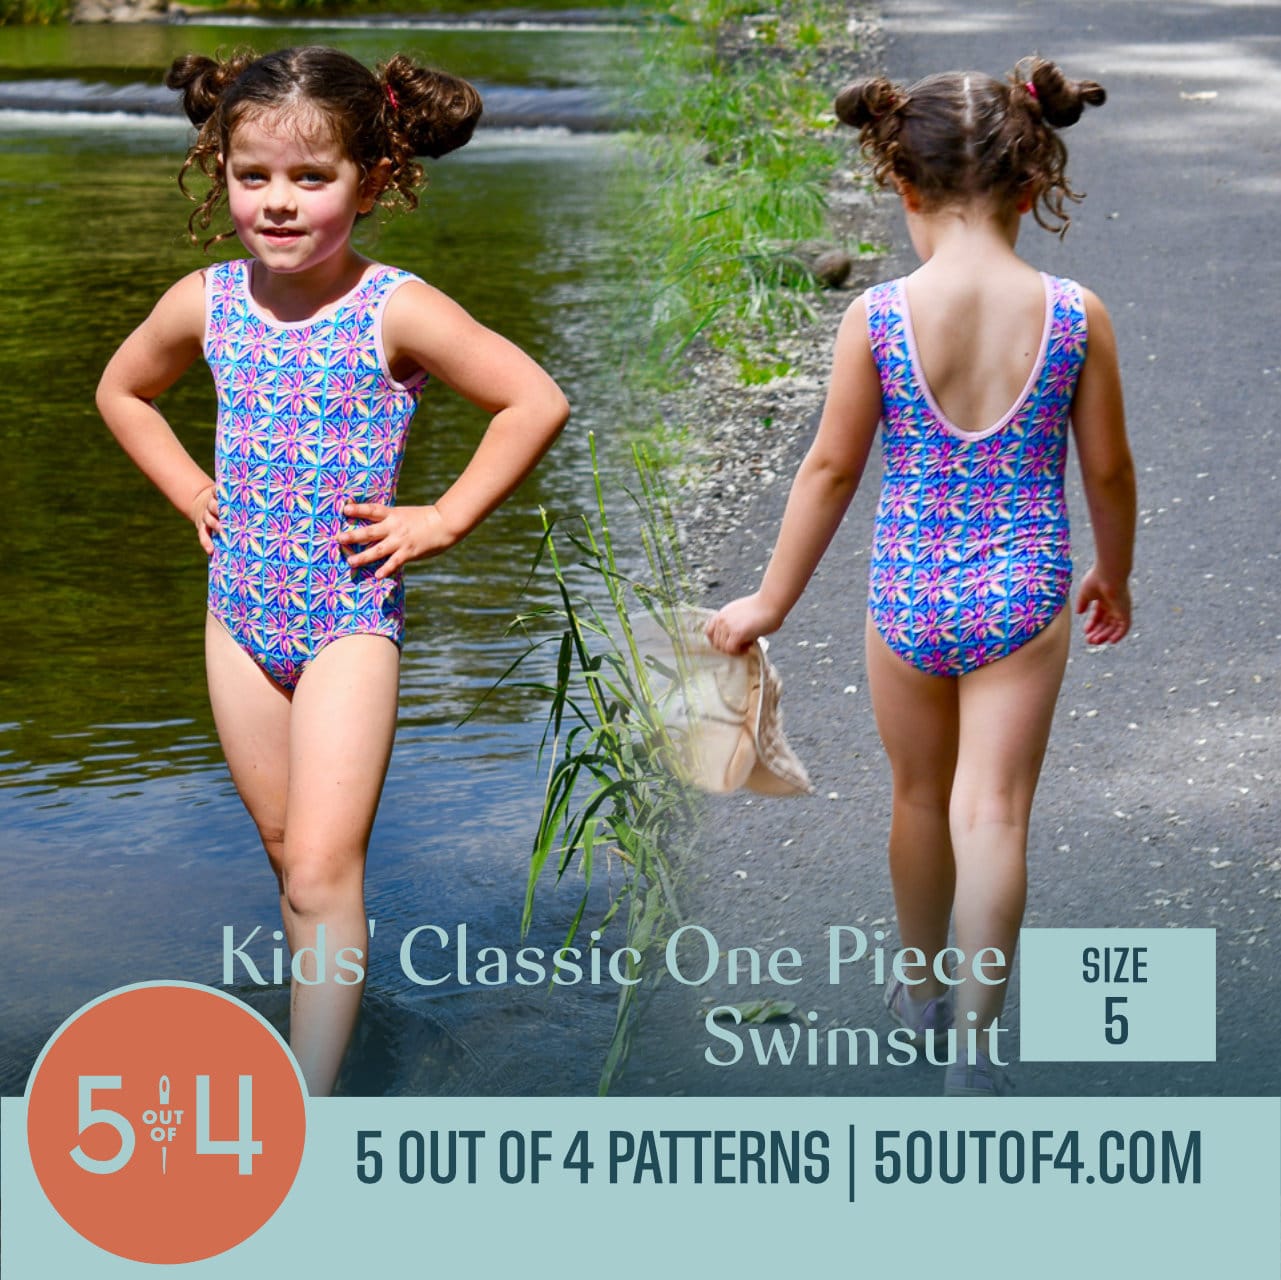 Classic One Piece Swimsuit Bundle - 5 out of 4 Patterns